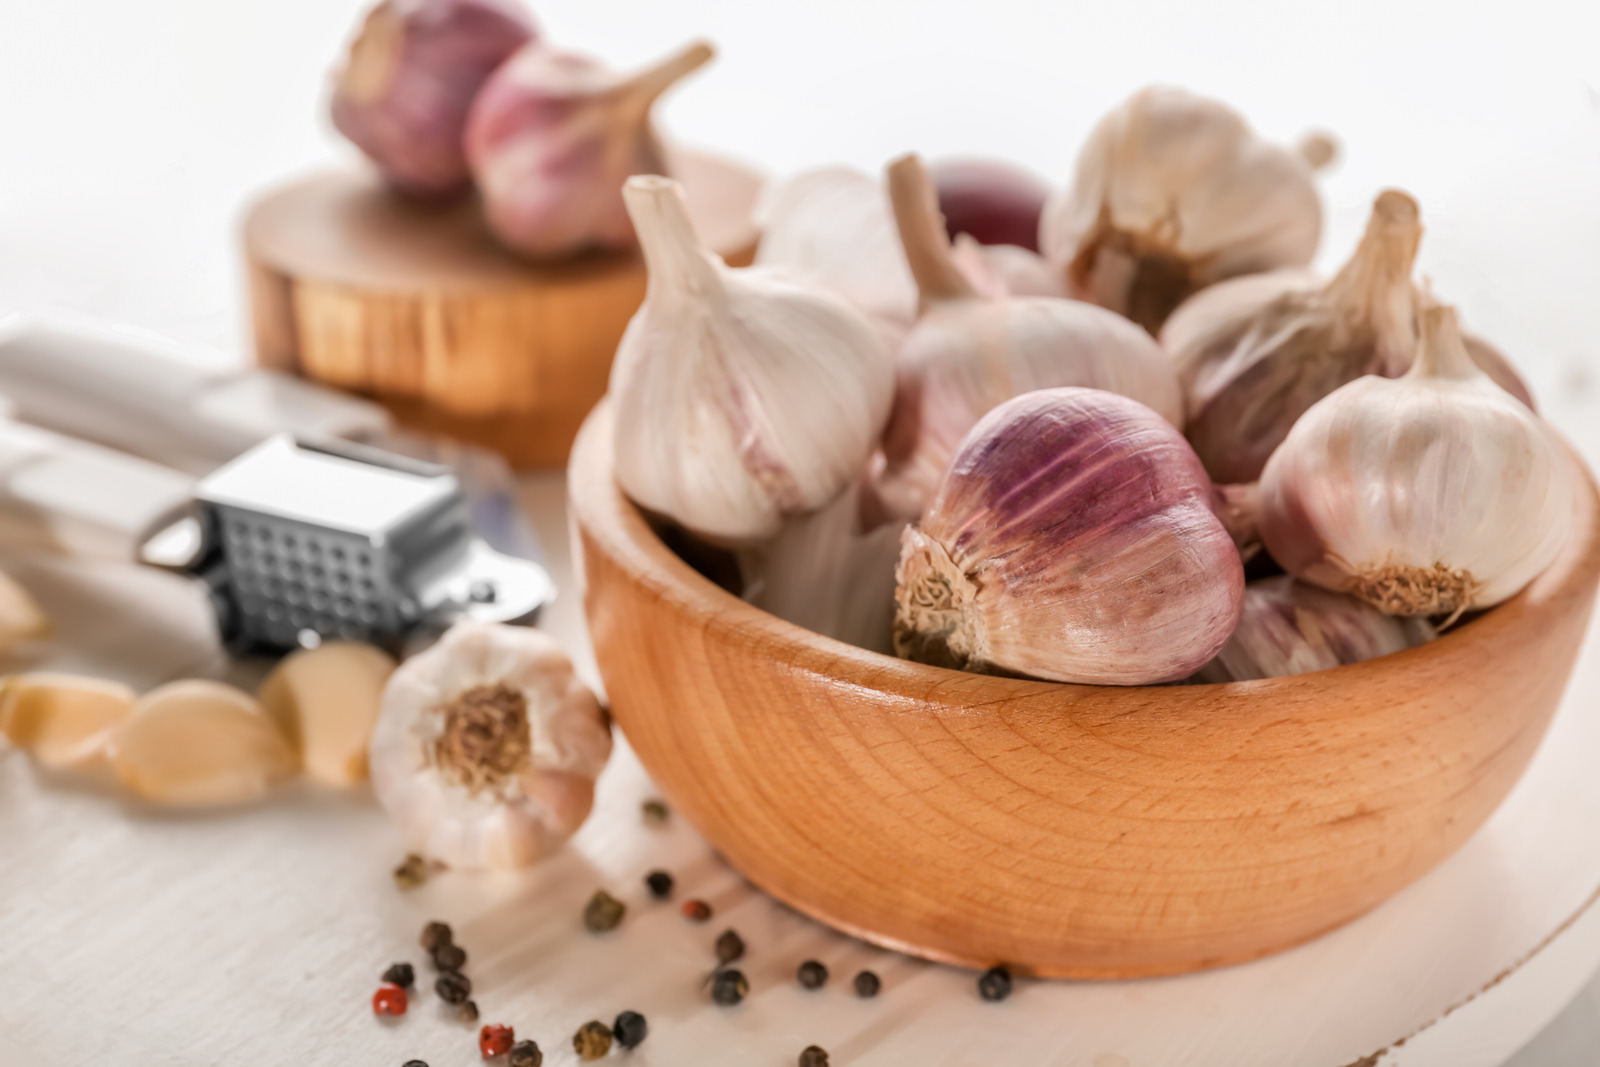 How To Take Garlic For Infection? PaperJaper